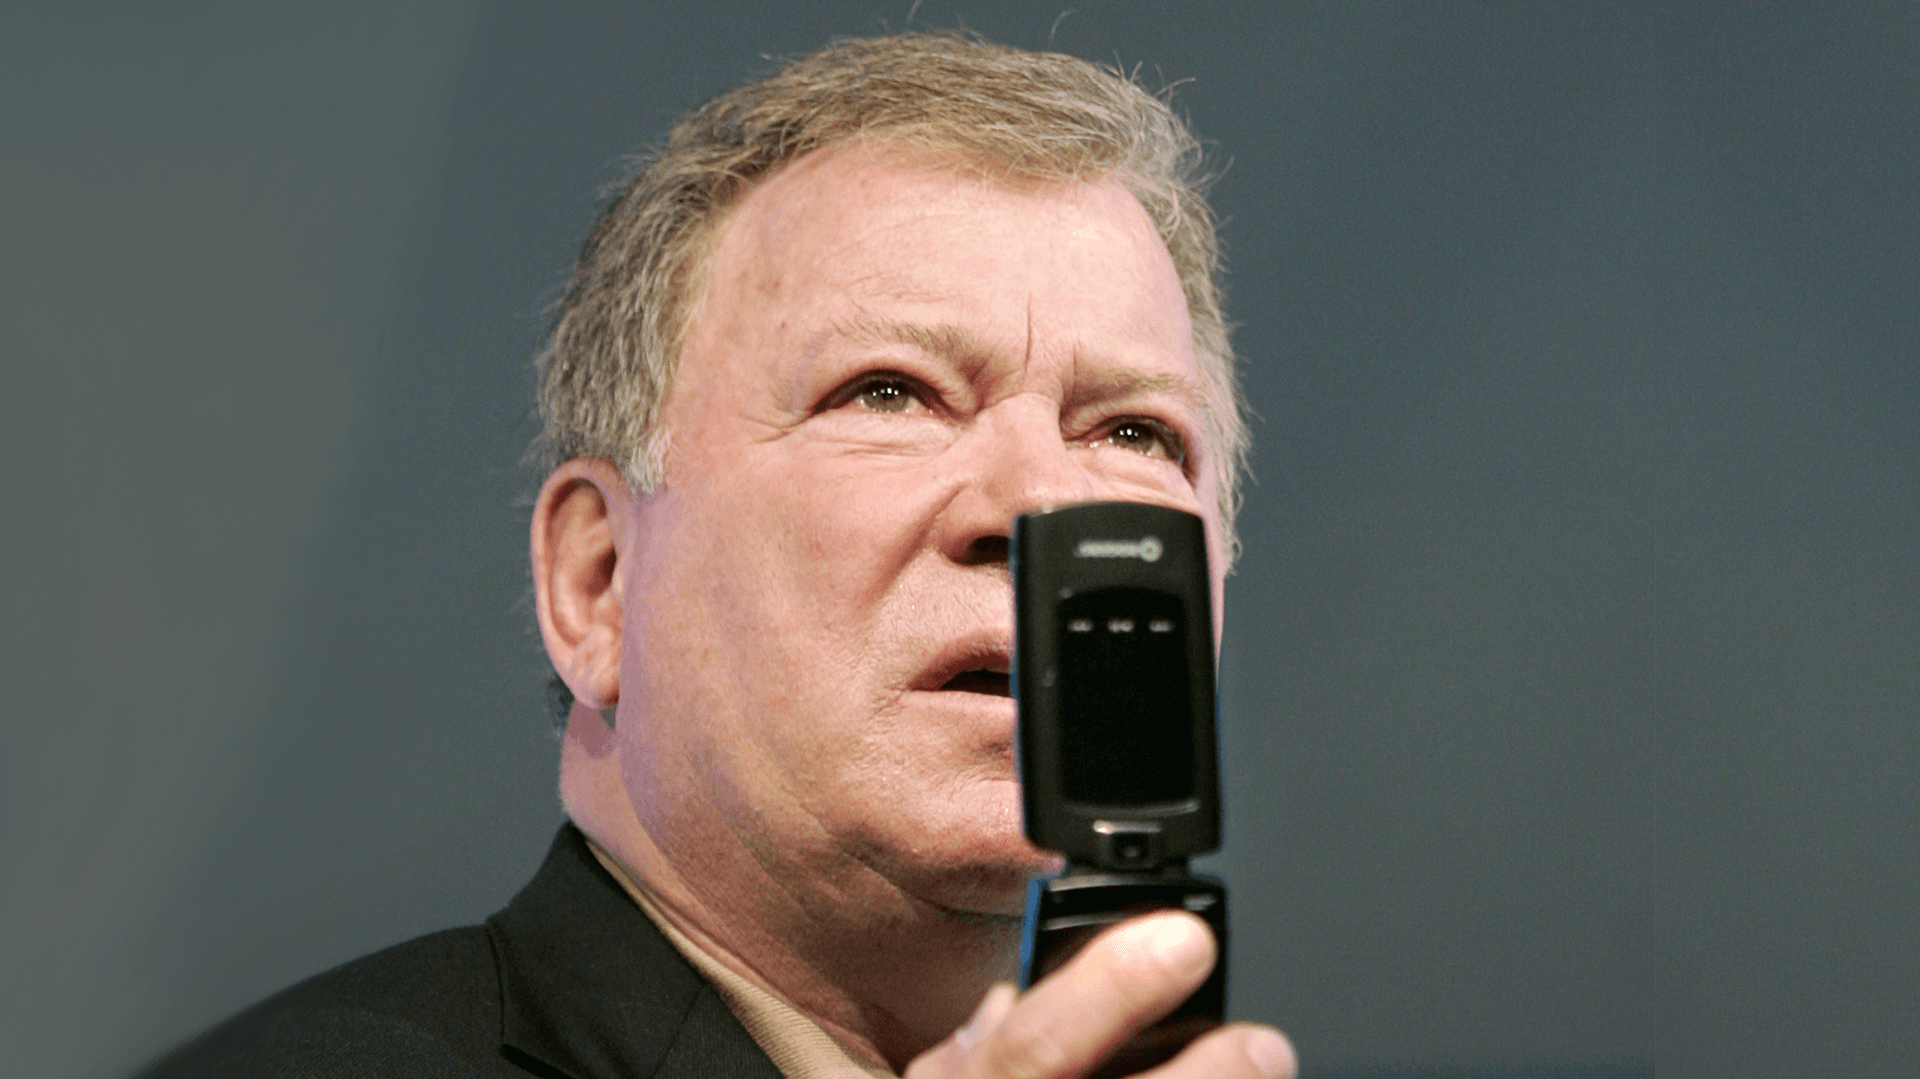 William Shatner, in a pose similar to his Star Trek character Captain Kirk using his communicator, unveils North America's first real-time video conferencing cell phone during a news conference in Toronto April 2, 2007.